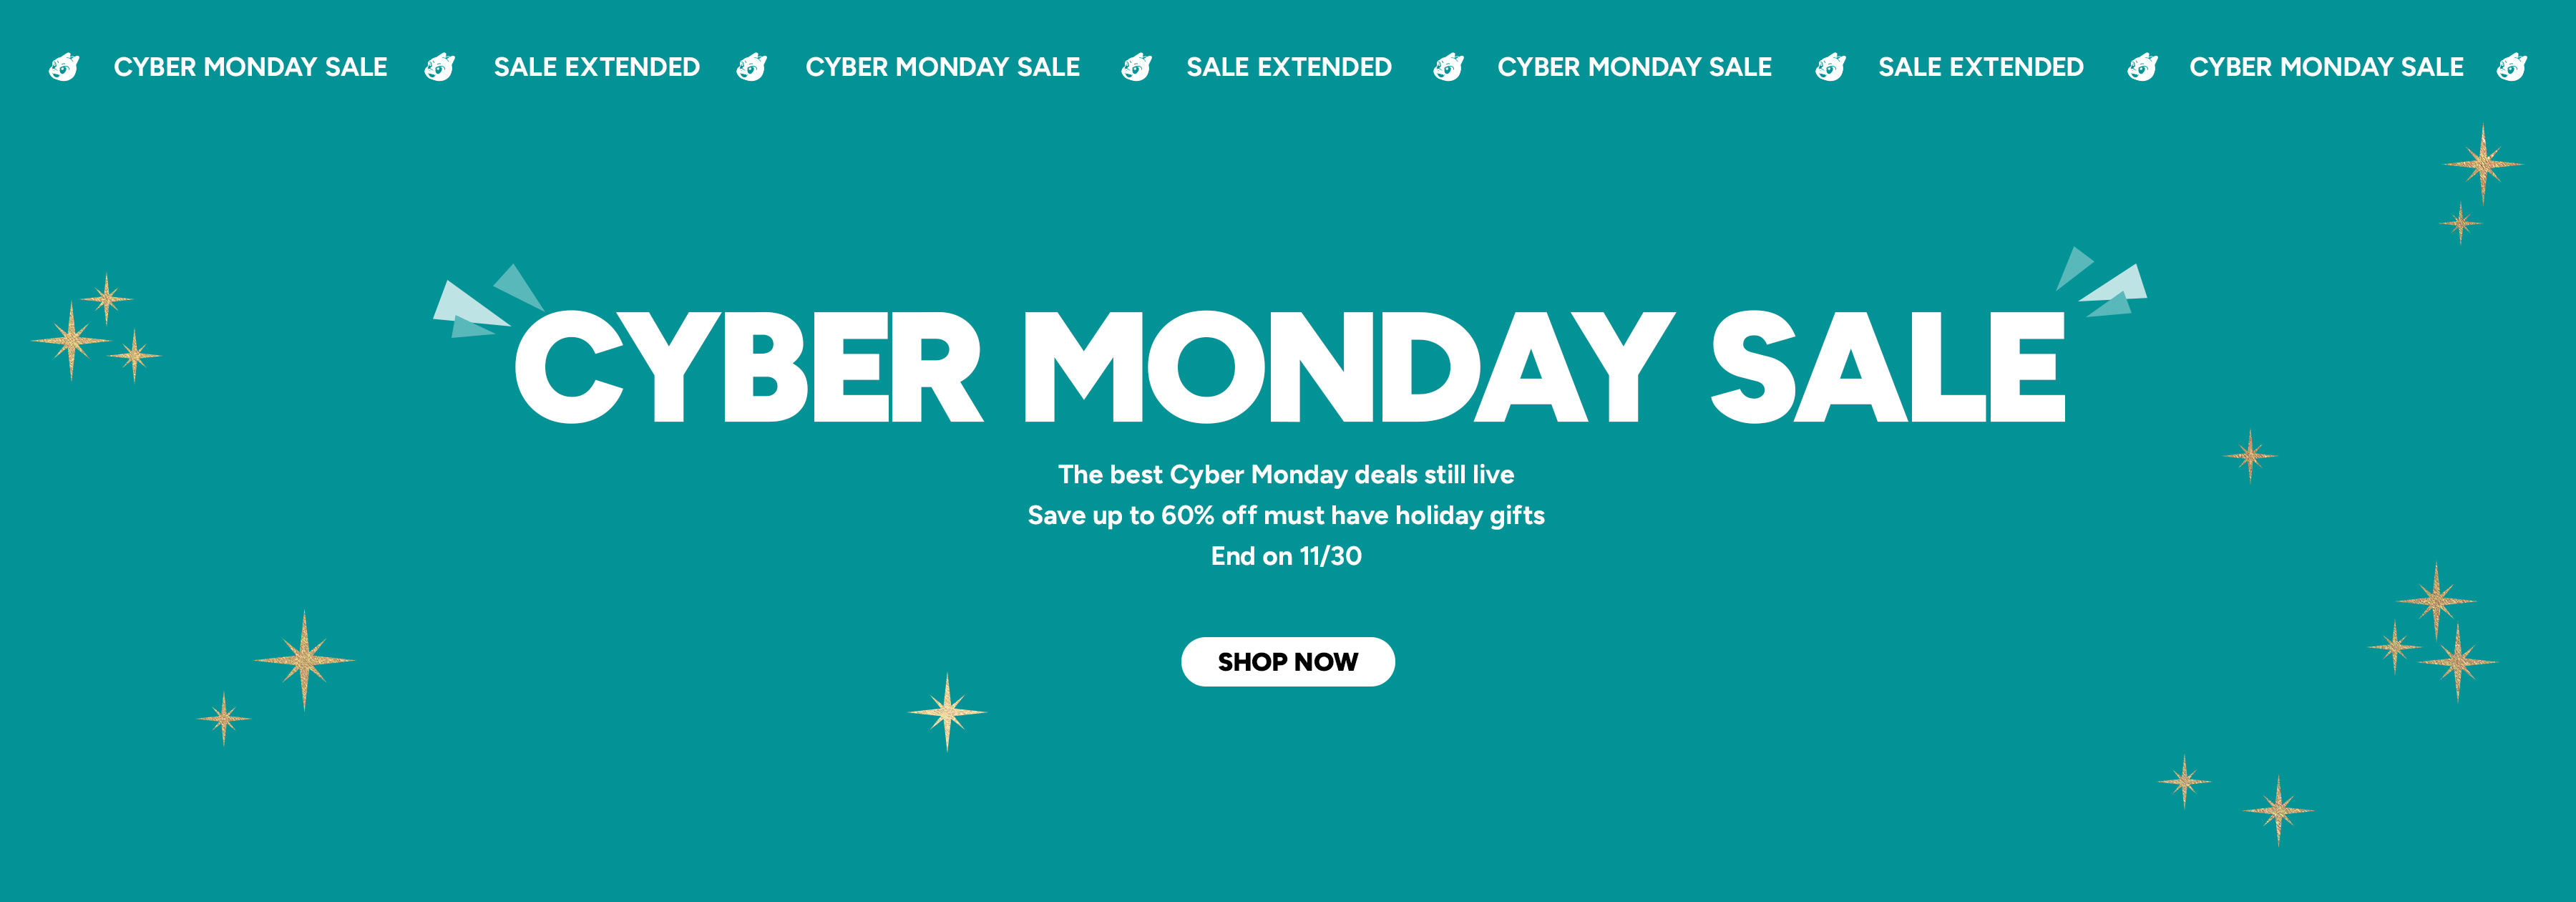 CYBER MONDAY DEALS ARE HERE